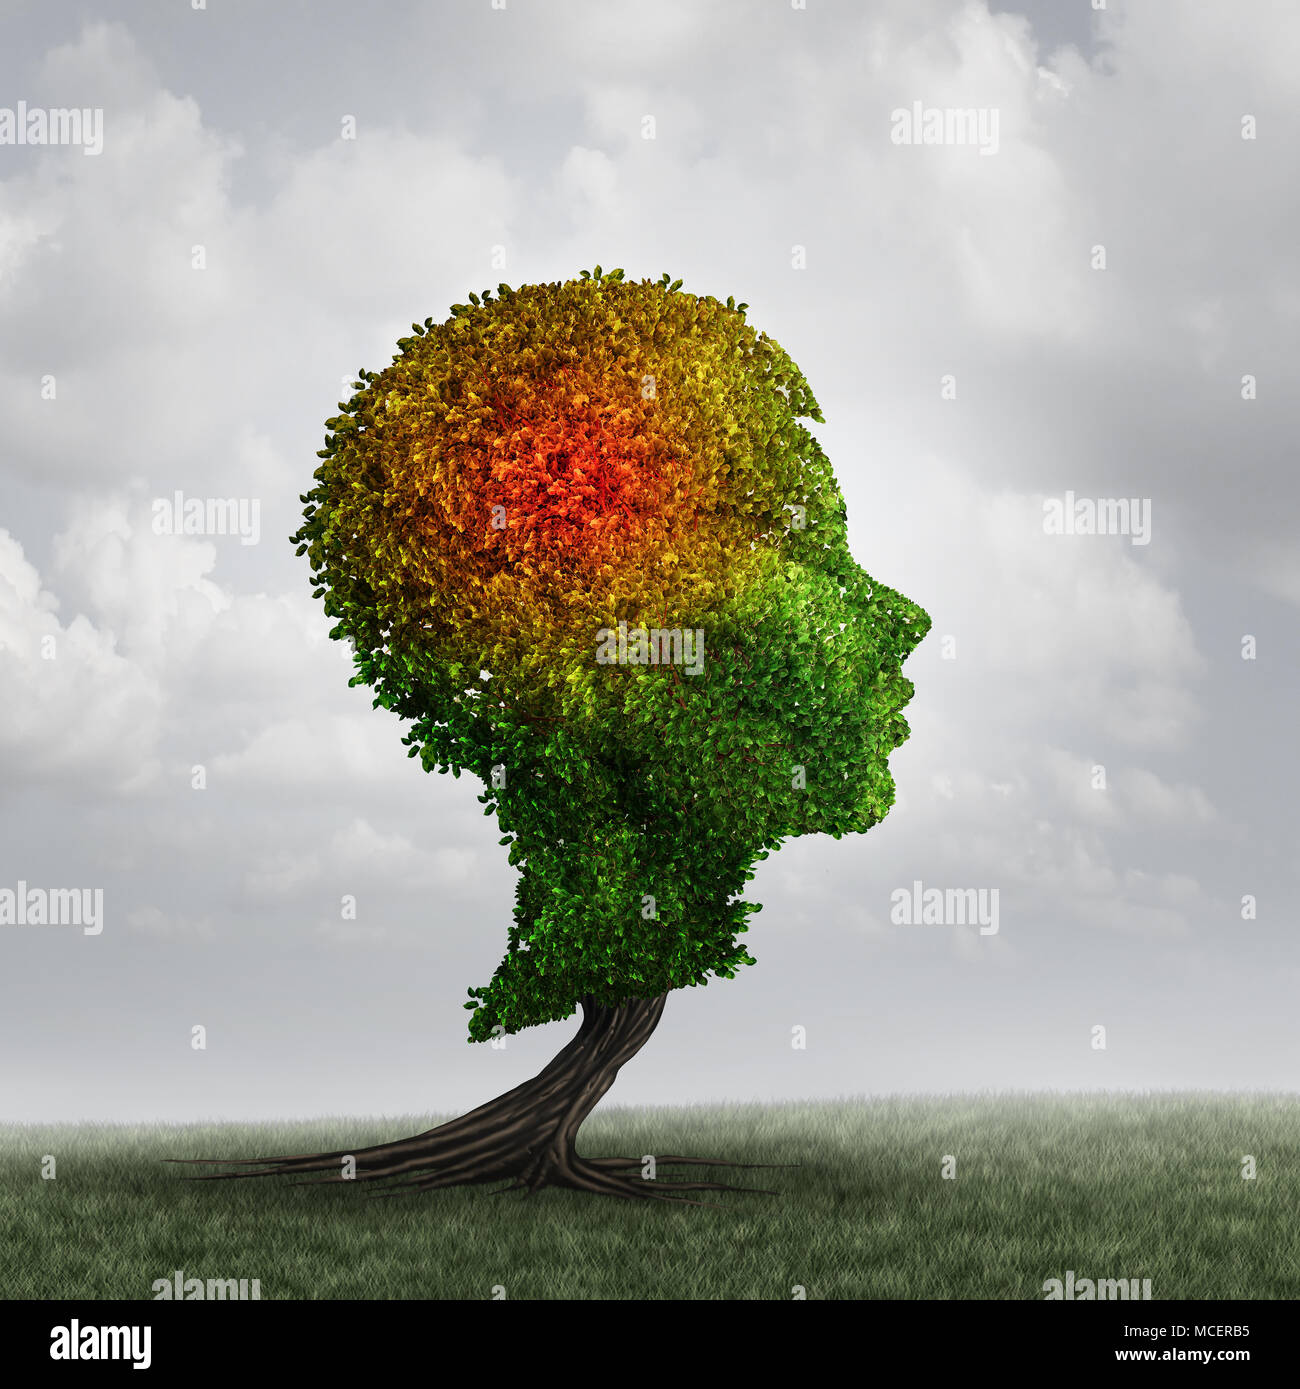 Autism and autistic child diagnosis disorder as a neurology disorder syndrome and a mental health spectrum concept as with 3D illustration elements. Stock Photo